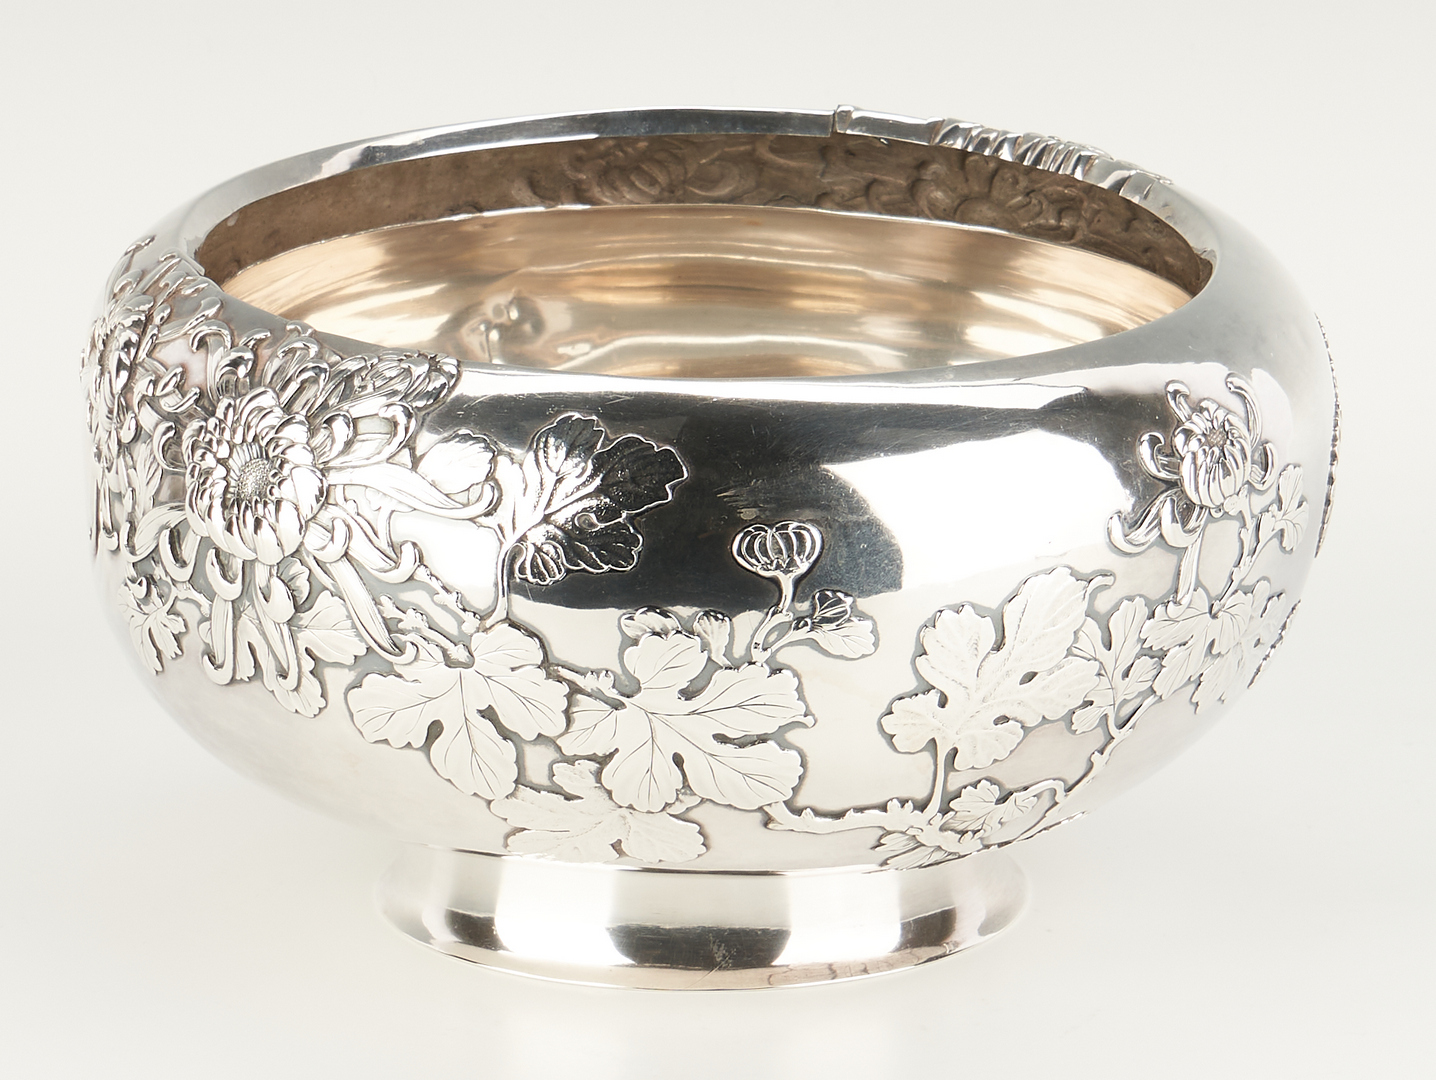 Lot 2: Japanese or Chinese Export Silver Bowl